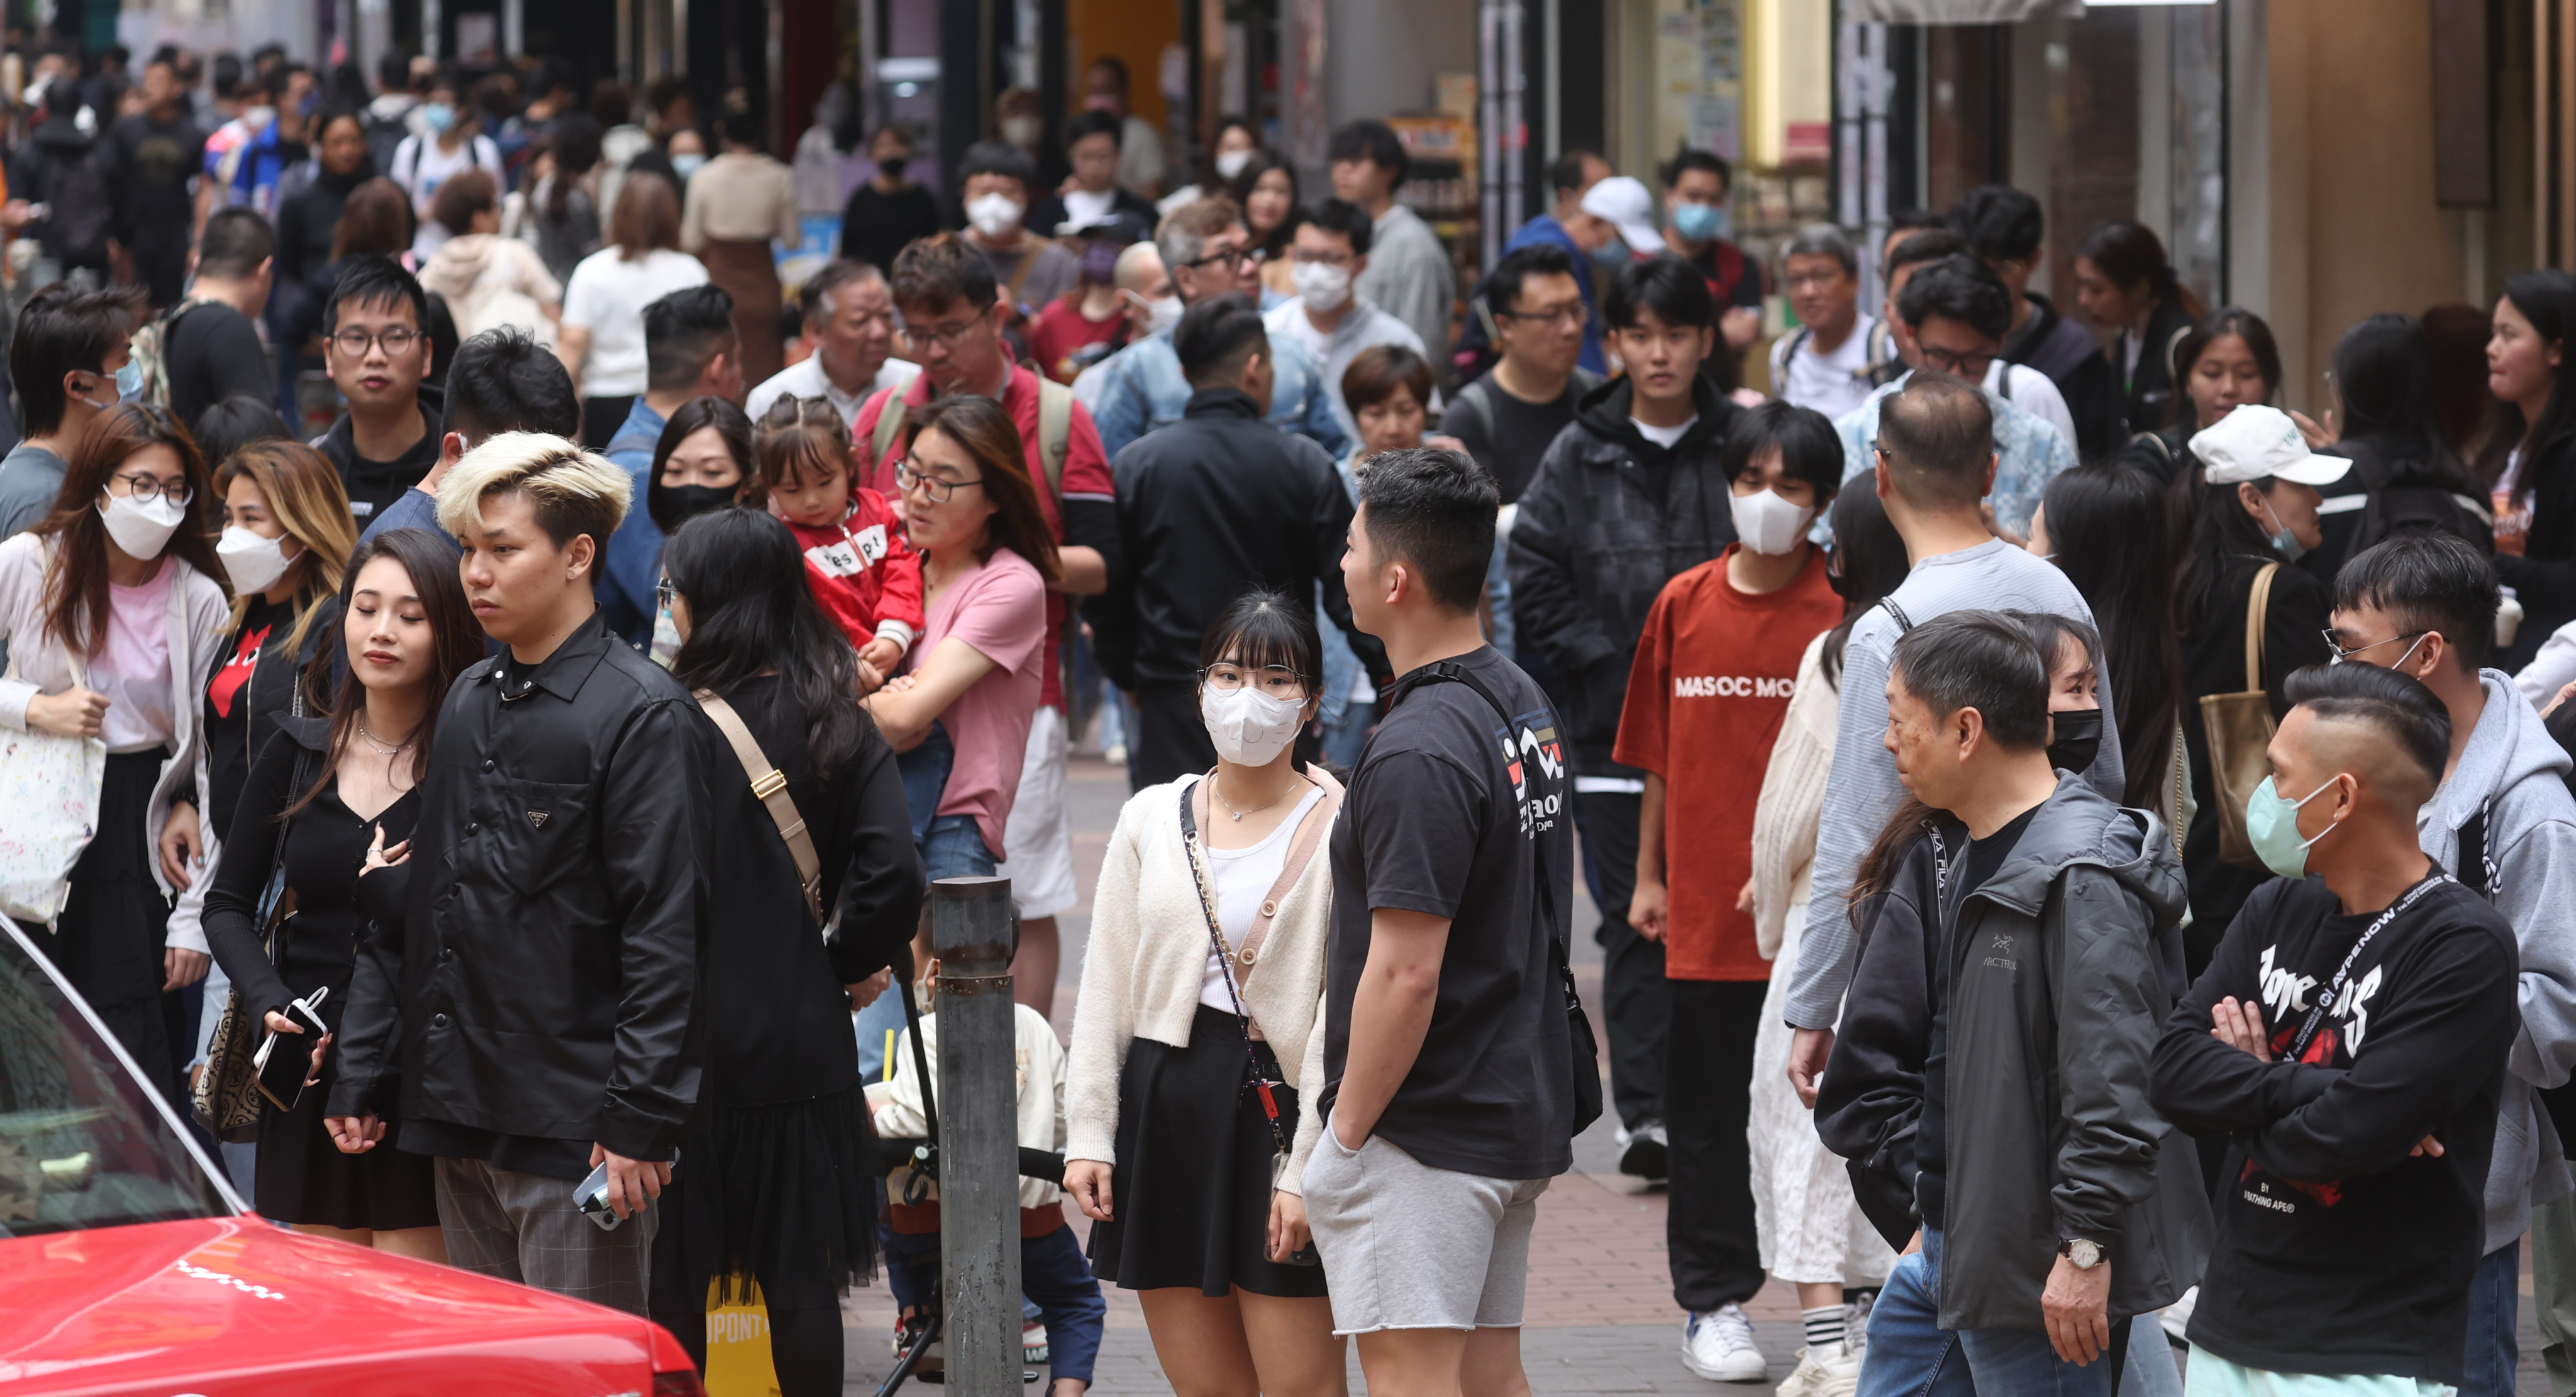 The flu season arrived late this year, following the lifting of the mask mandate in March. Photo: Yik Yeung-man